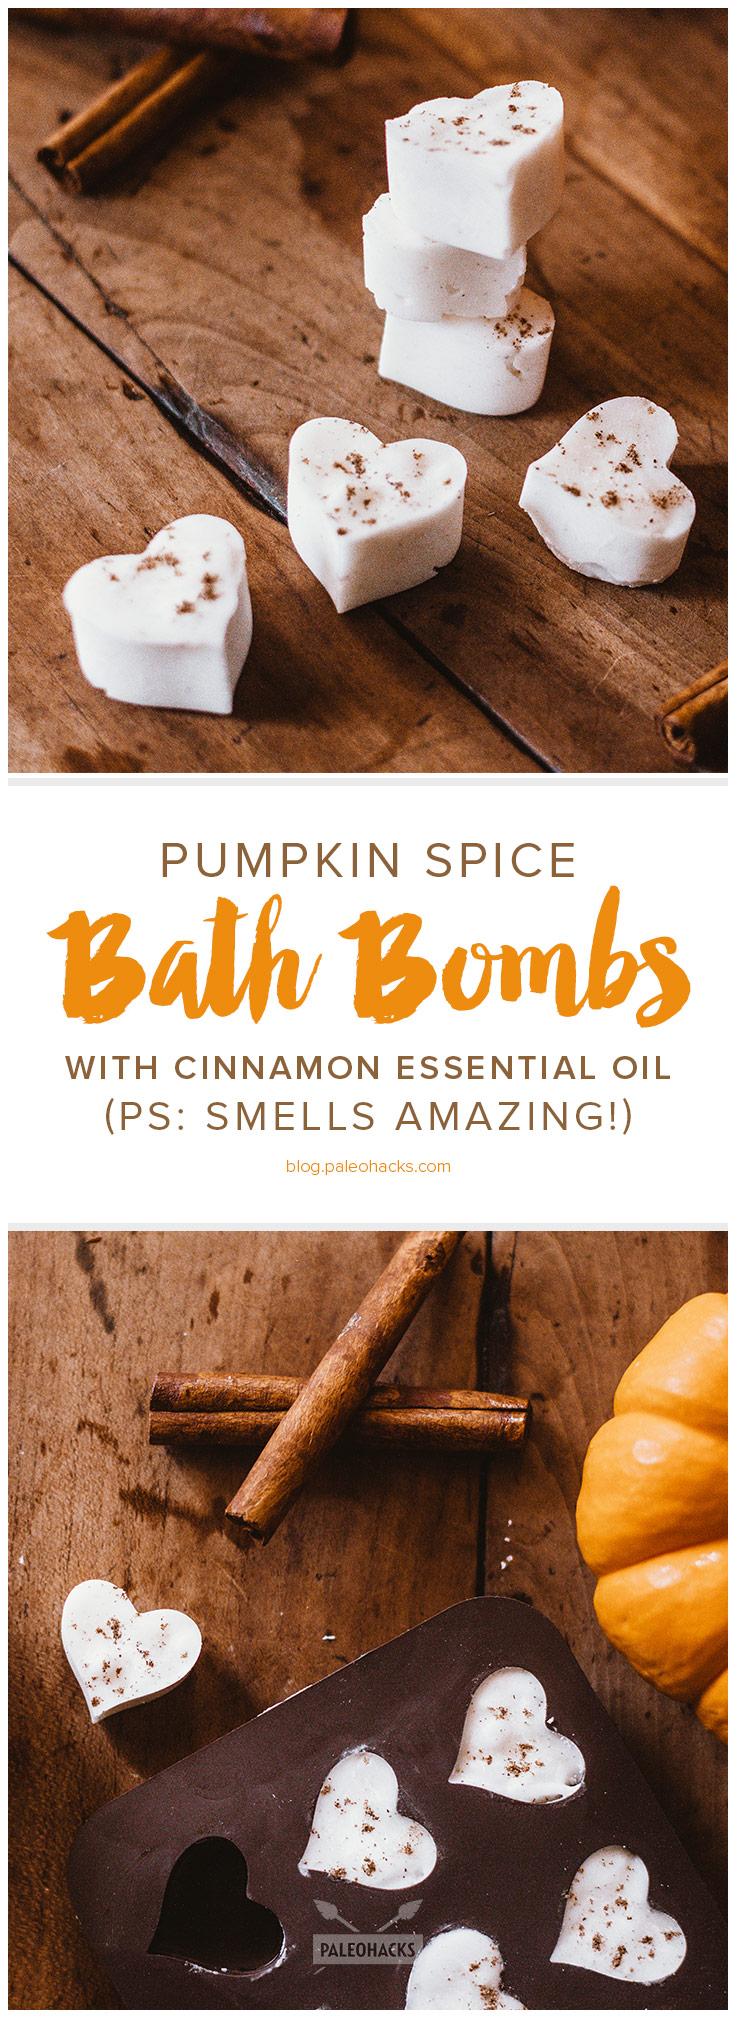 Make your bath rituals sweet as can be with these easy DIY pumpkin pie bath bombs. Lattes are for energizing, these bath bombs are for relaxing!